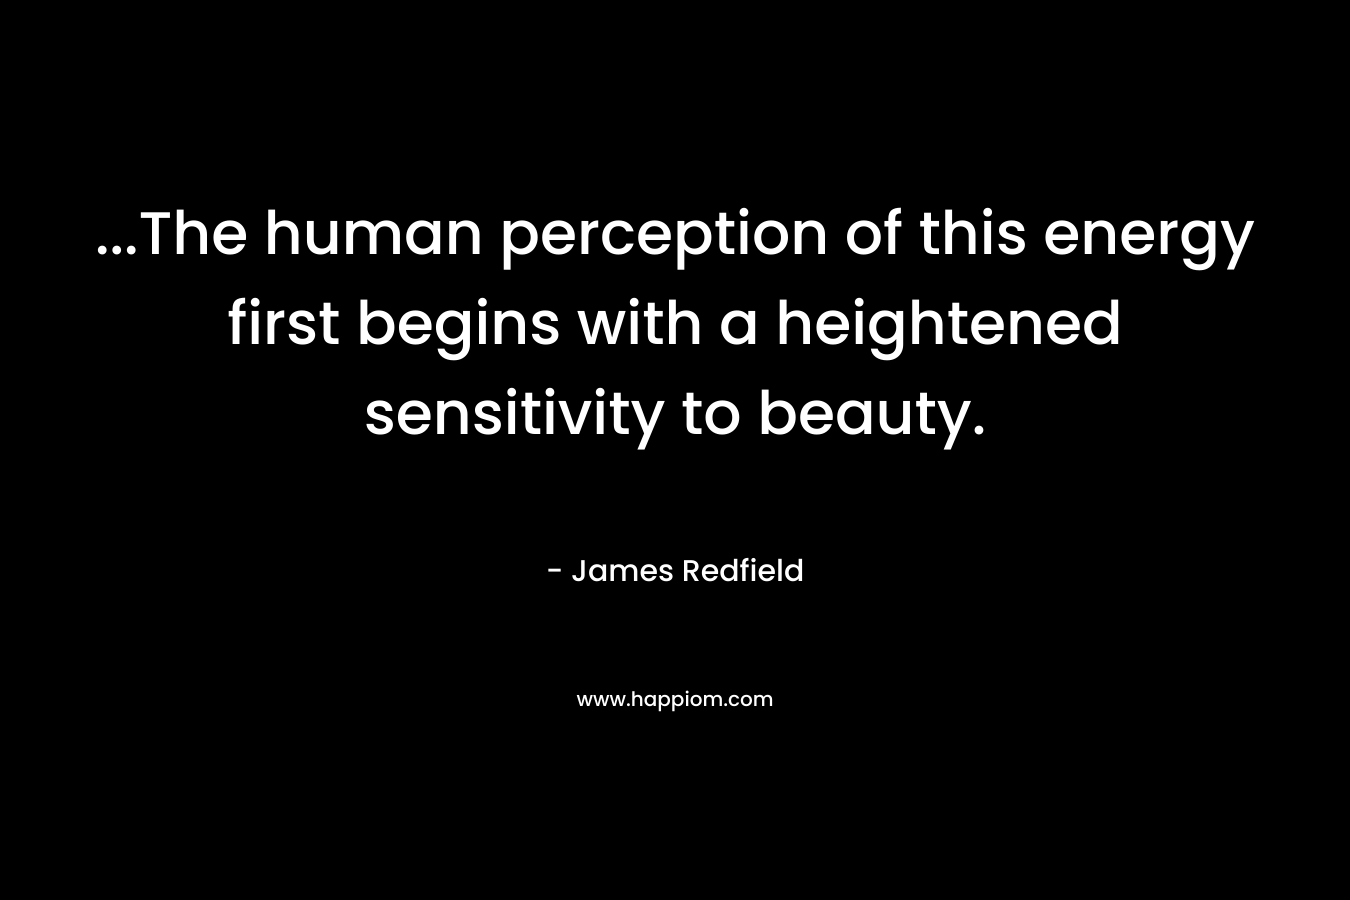 …The human perception of this energy first begins with a heightened sensitivity to beauty. – James Redfield